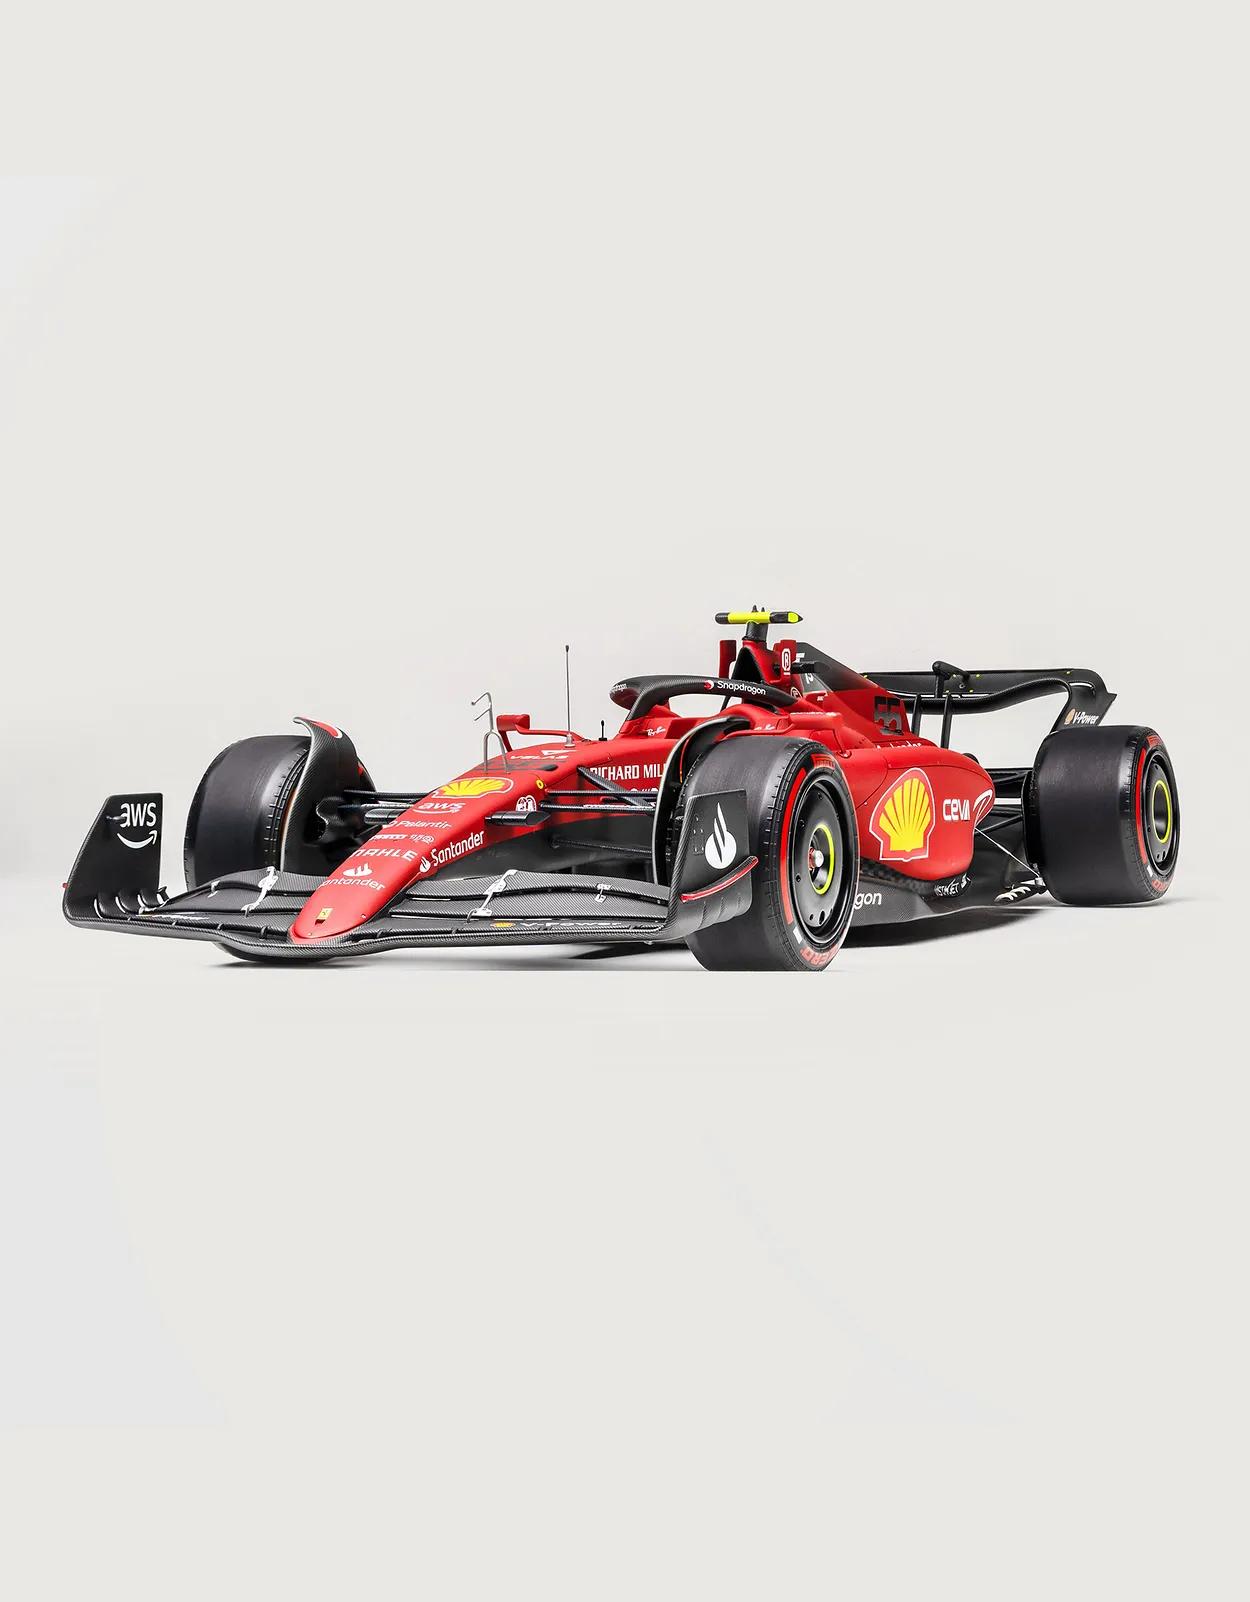 ferrari f1 car collection buy - Can you buy F1 cars